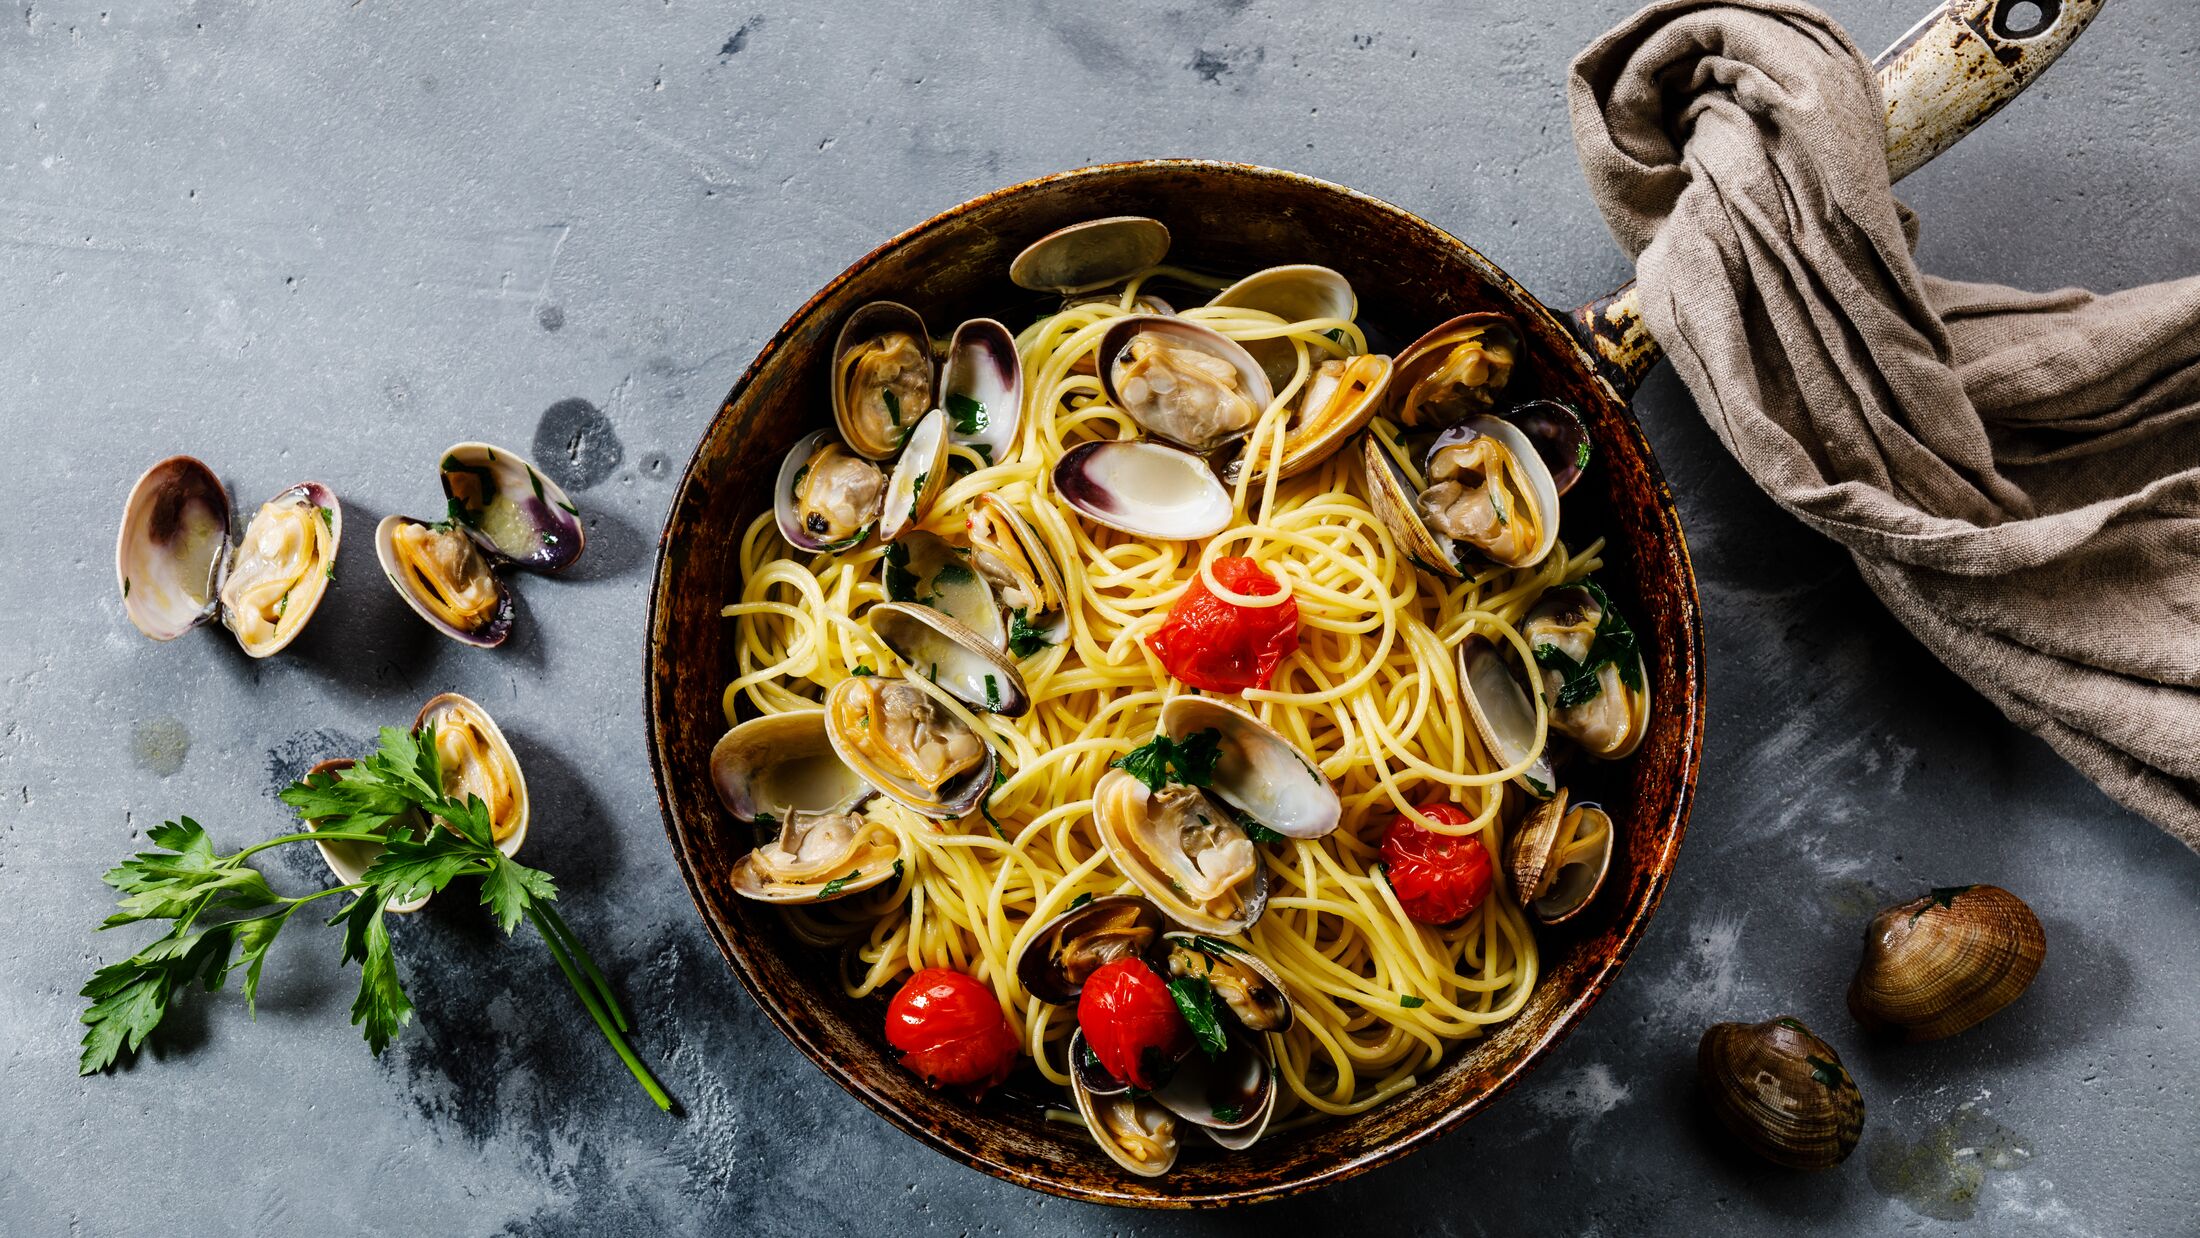 Pasta Spaghetti alle Vongole Seafood pasta with Clams in frying cooking pan on concrete background